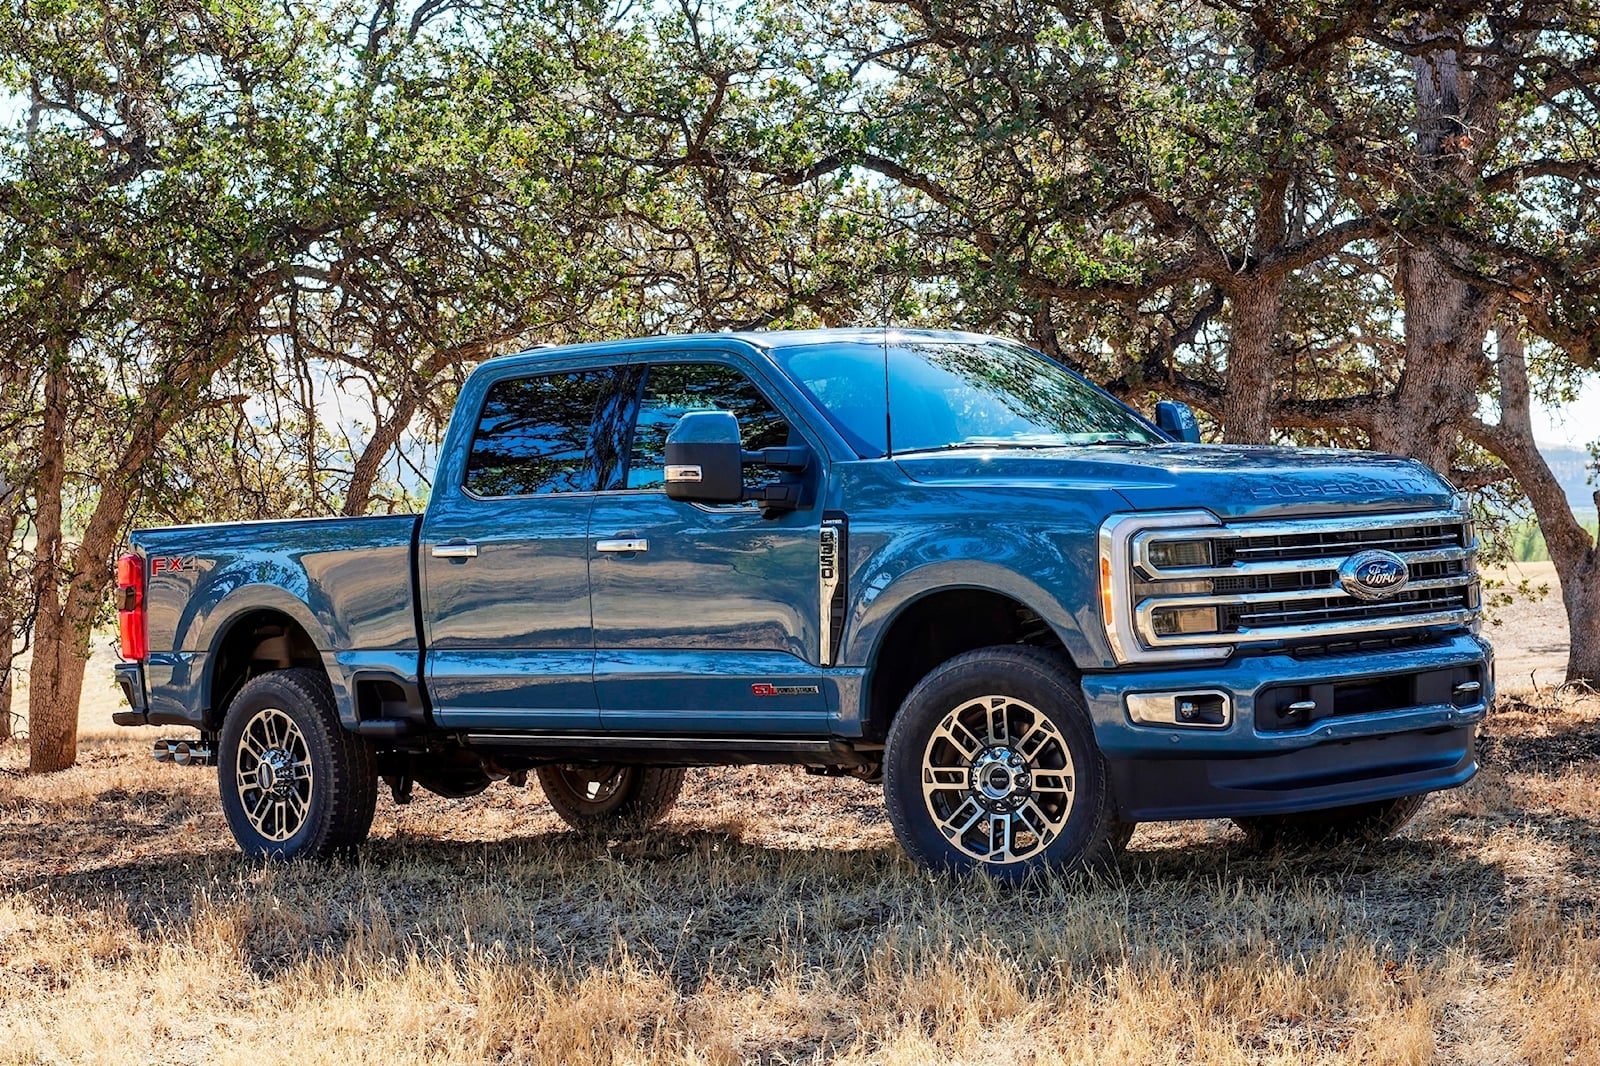 2023 Ford Super Duty Truck Order Books Open Earlier Than Expected